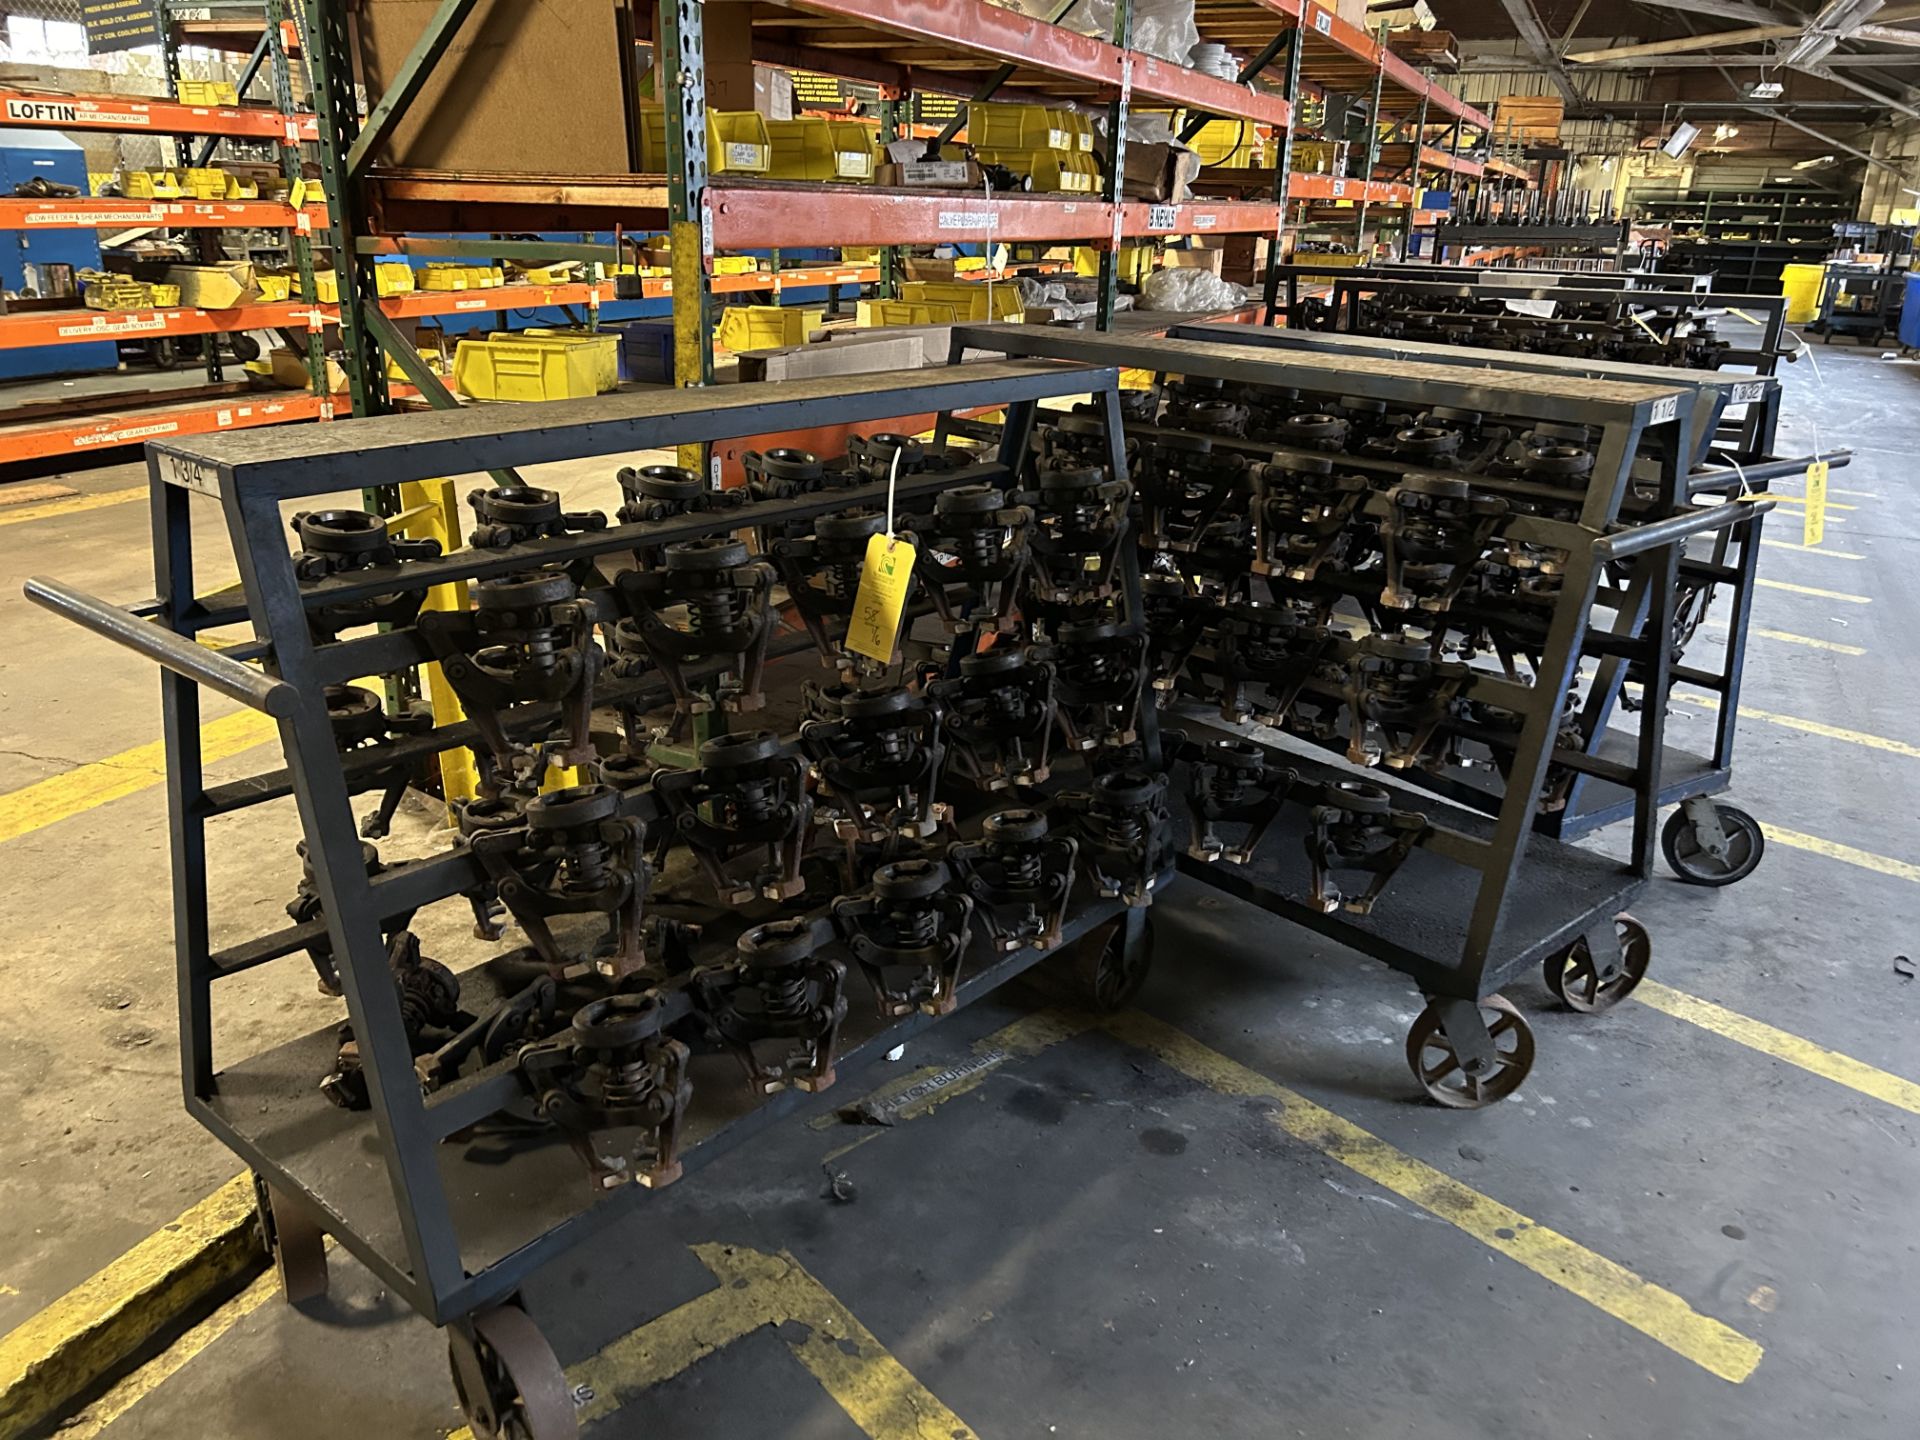 Spare Spindles, Includes 6 Racks, Rigging/Removal Fees - $525